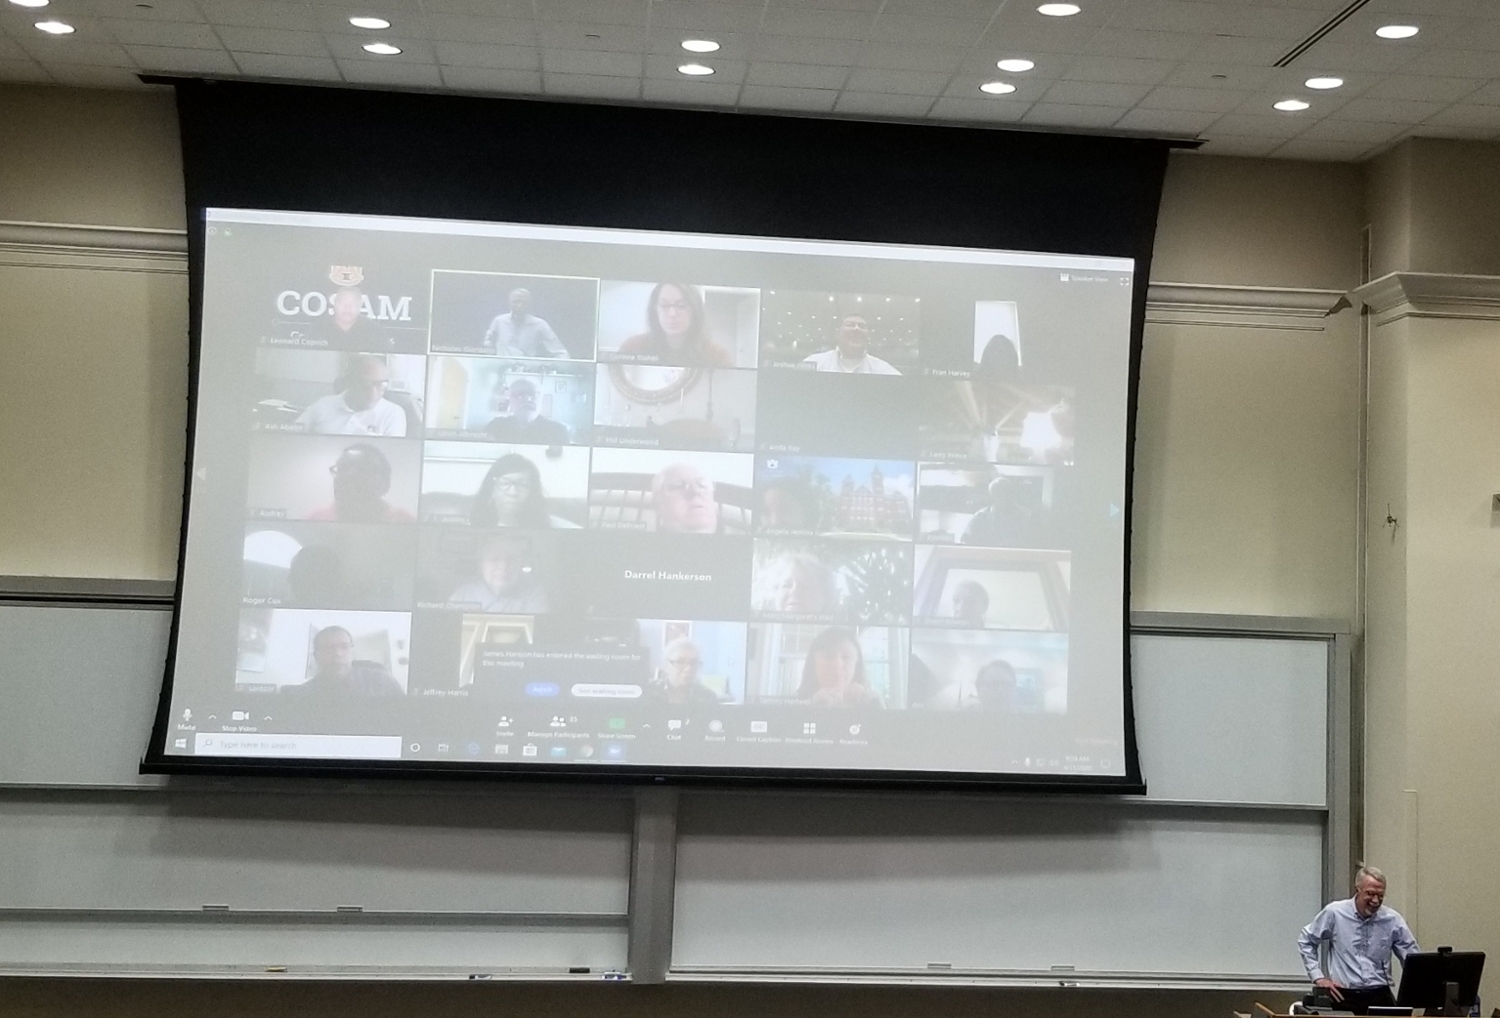 Dean Giordano Shares Virtual Update with COSAM's Leadership Council Members